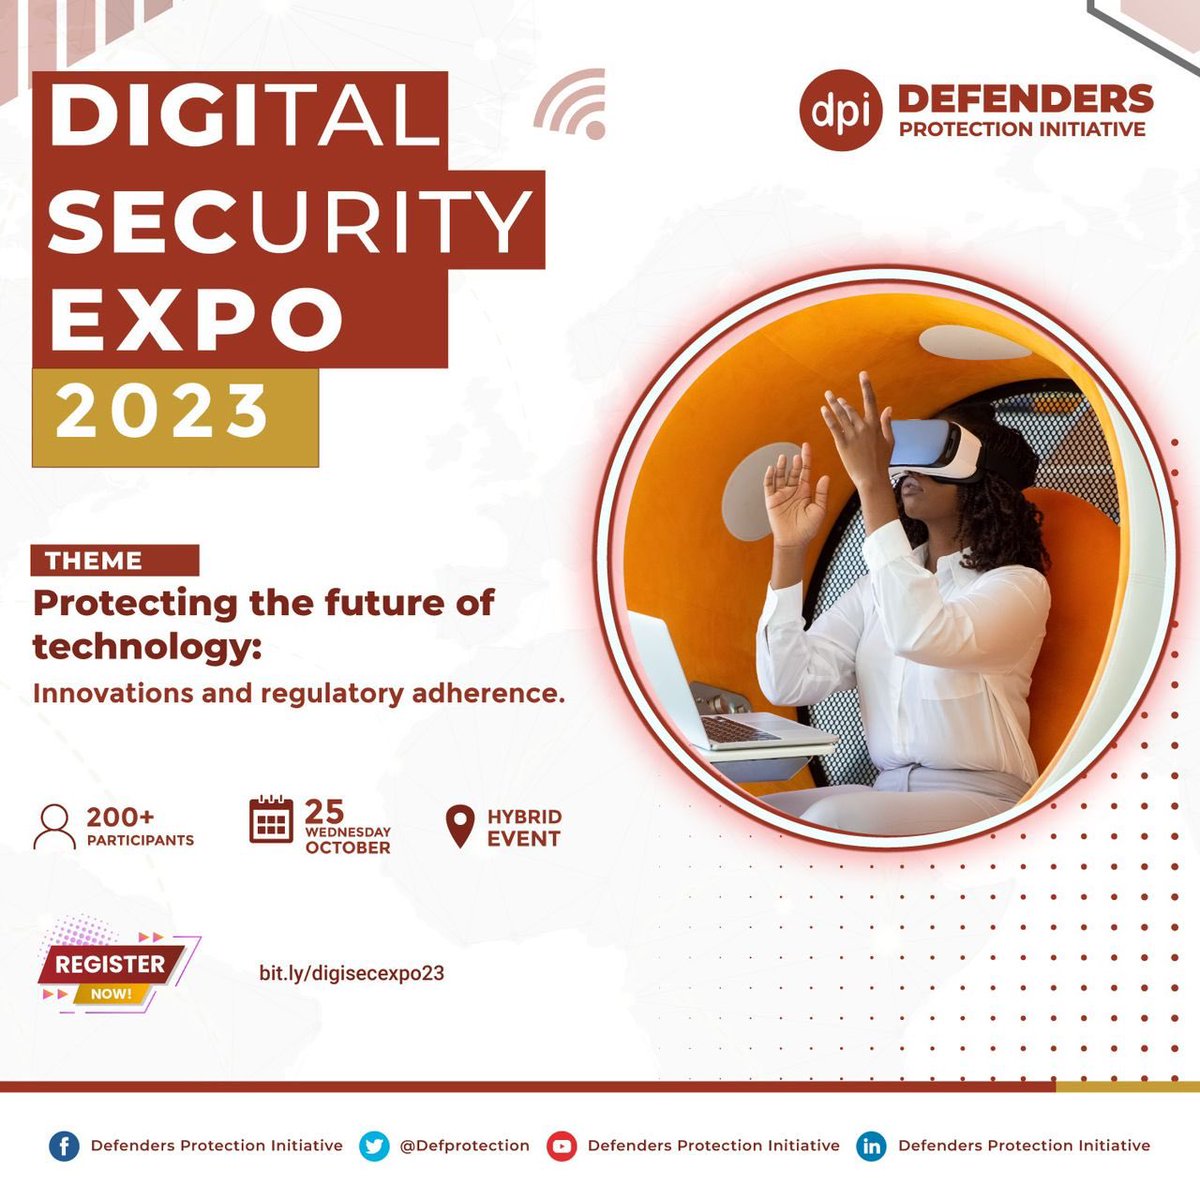 TOMORROW: Join us at #DigitalSecurityExpo23 for a deep dive into cutting-edge tech, regulatory insights, and your digital rights. Register now! bit.ly/digisecexpo23